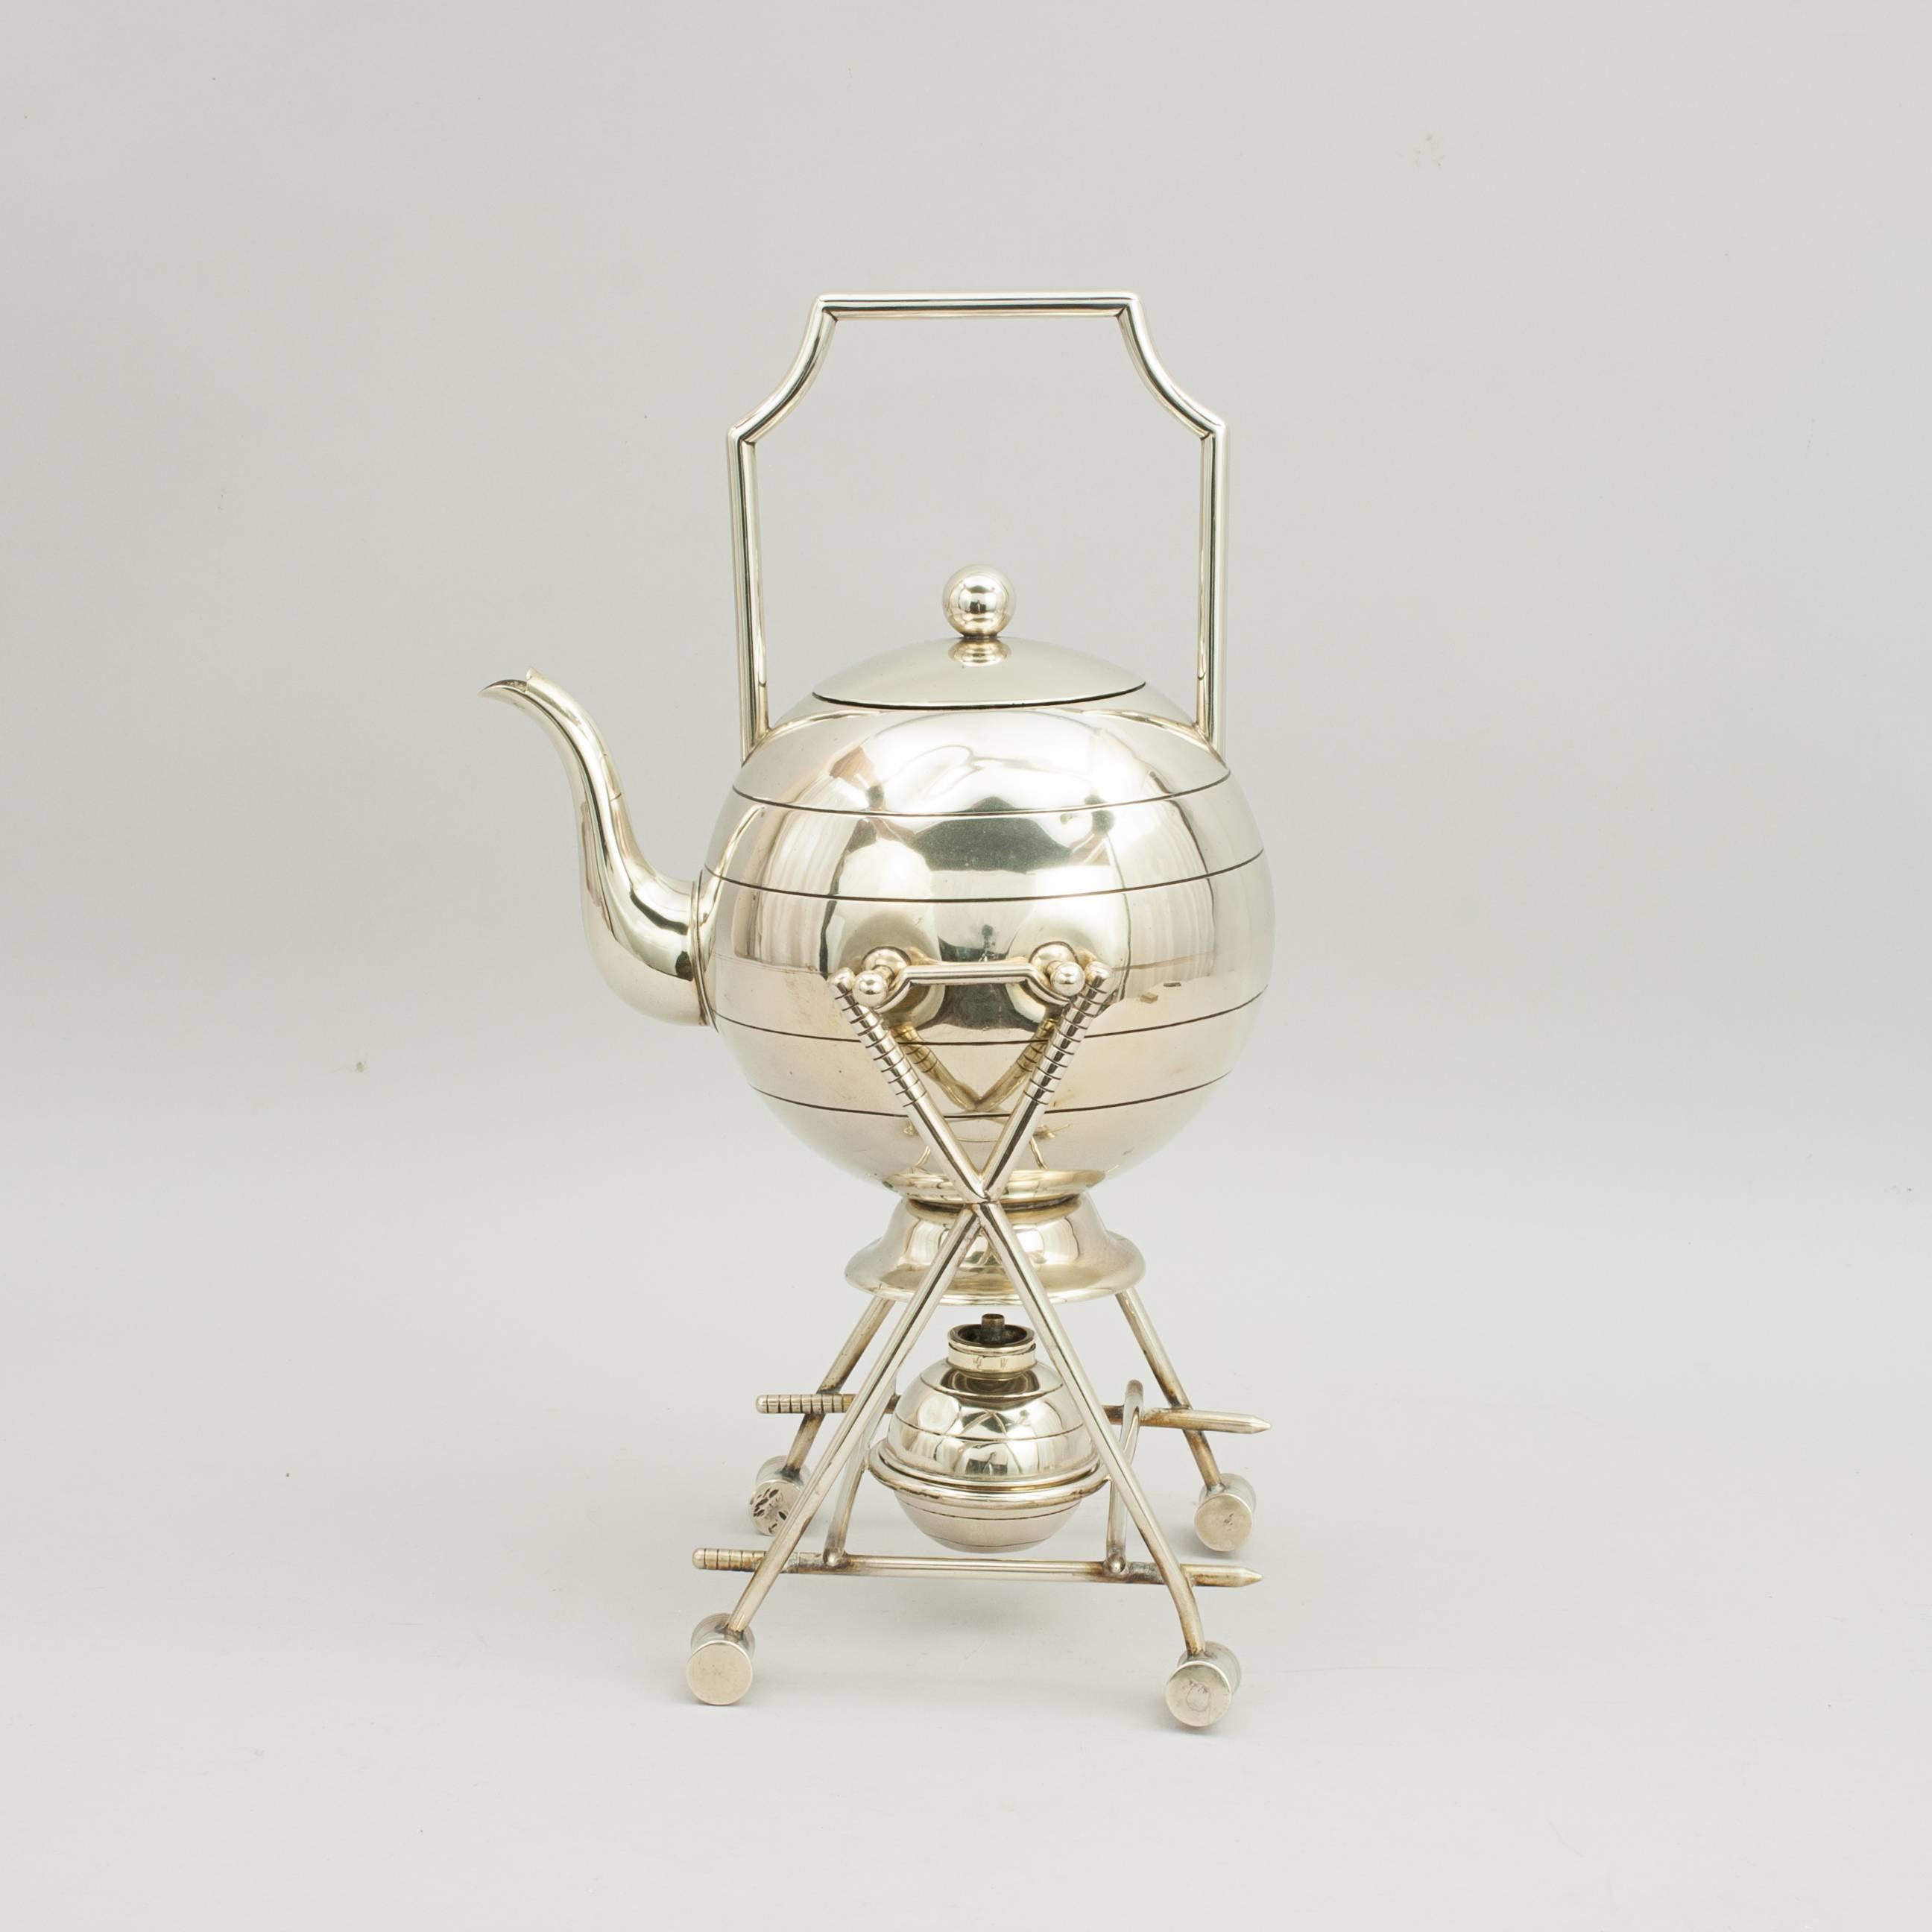 An English silver plated croquet tea pot with spirit warmer on stand. The pot stand is formed by two pairs of crossed croquet mallets, the teapot is designed as a croquet ball, a hoop forms the handle. A wonderful unusual spirit kettle that pivots